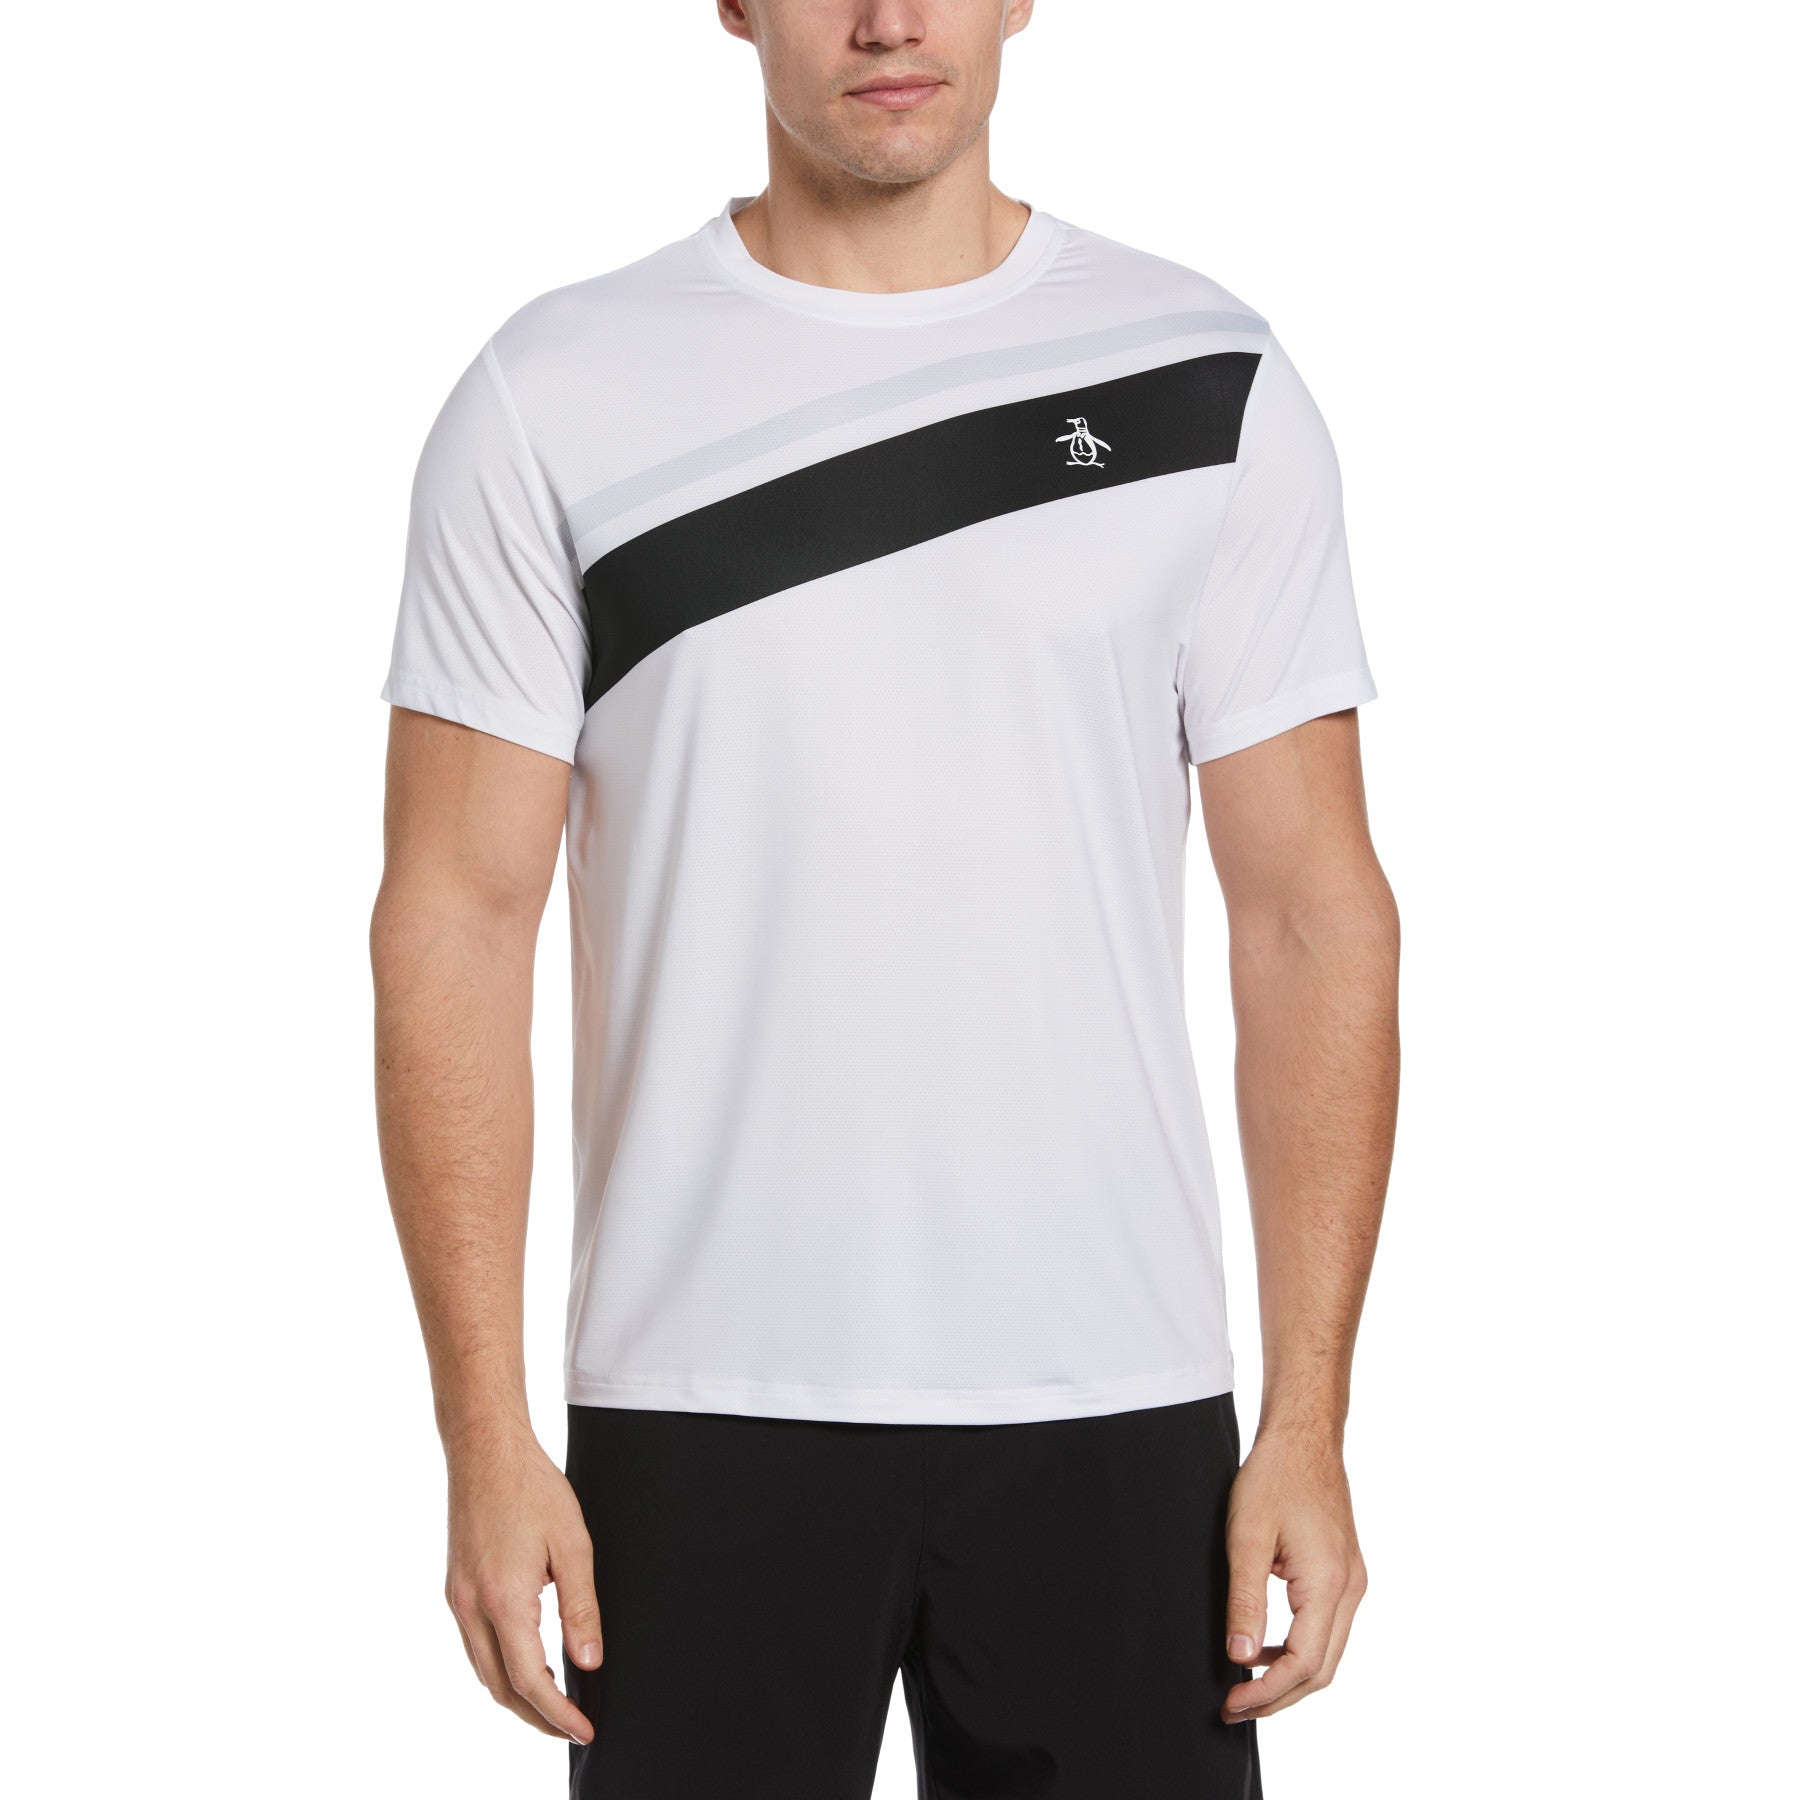 View Performance Color Block Print Tennis TShirt In Bright White information